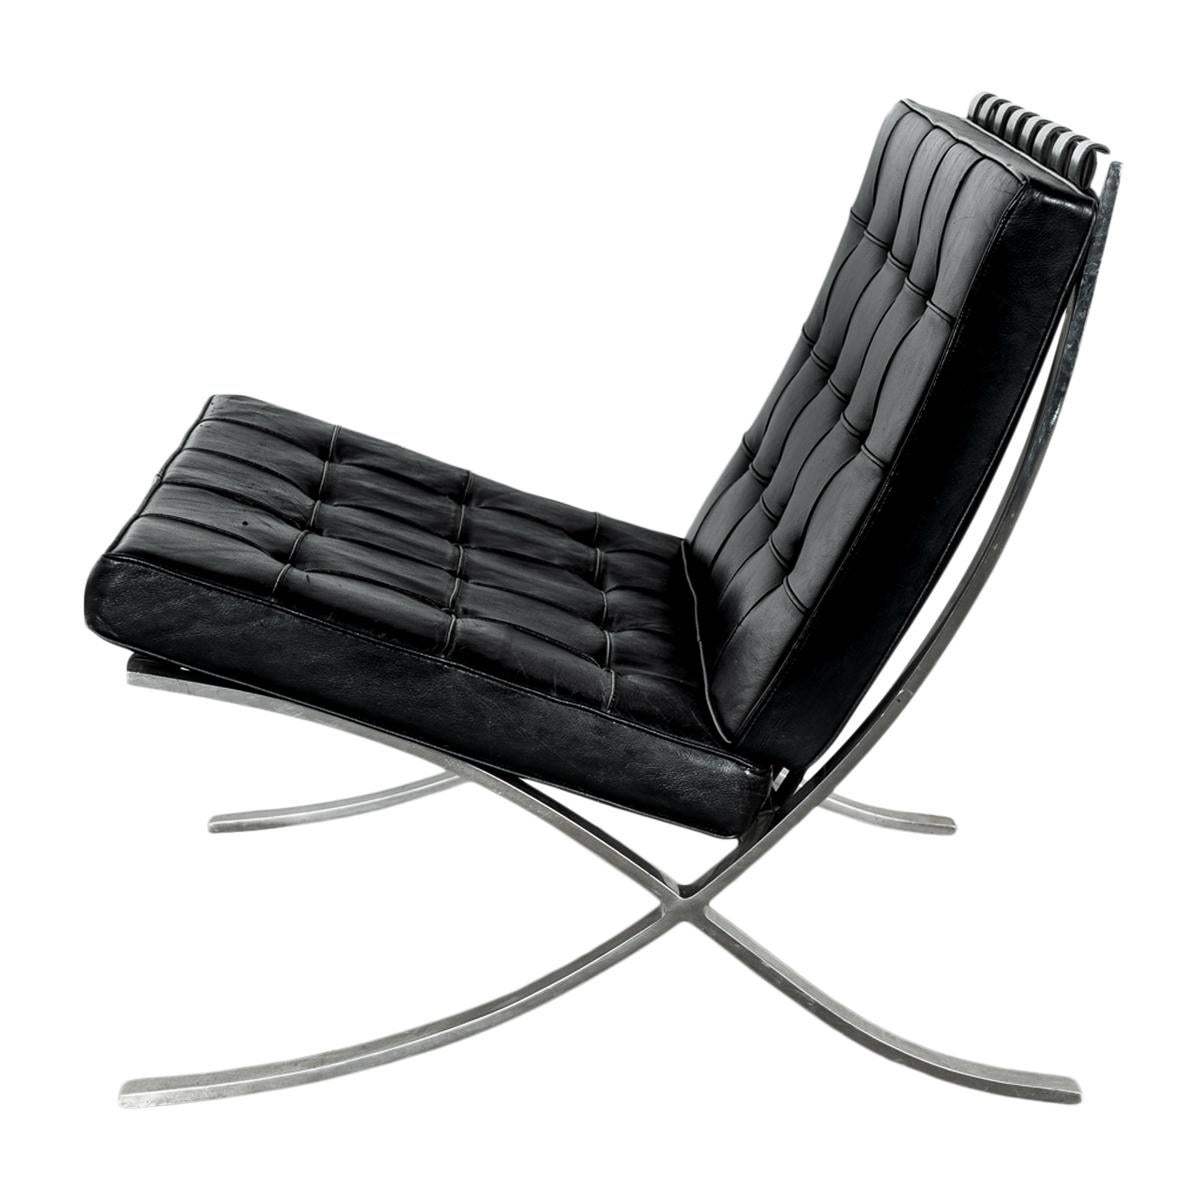 Early Pair MCM Knoll Barcelona Chairs Black Leather Mies van der Rohe 1961 For Sale 2